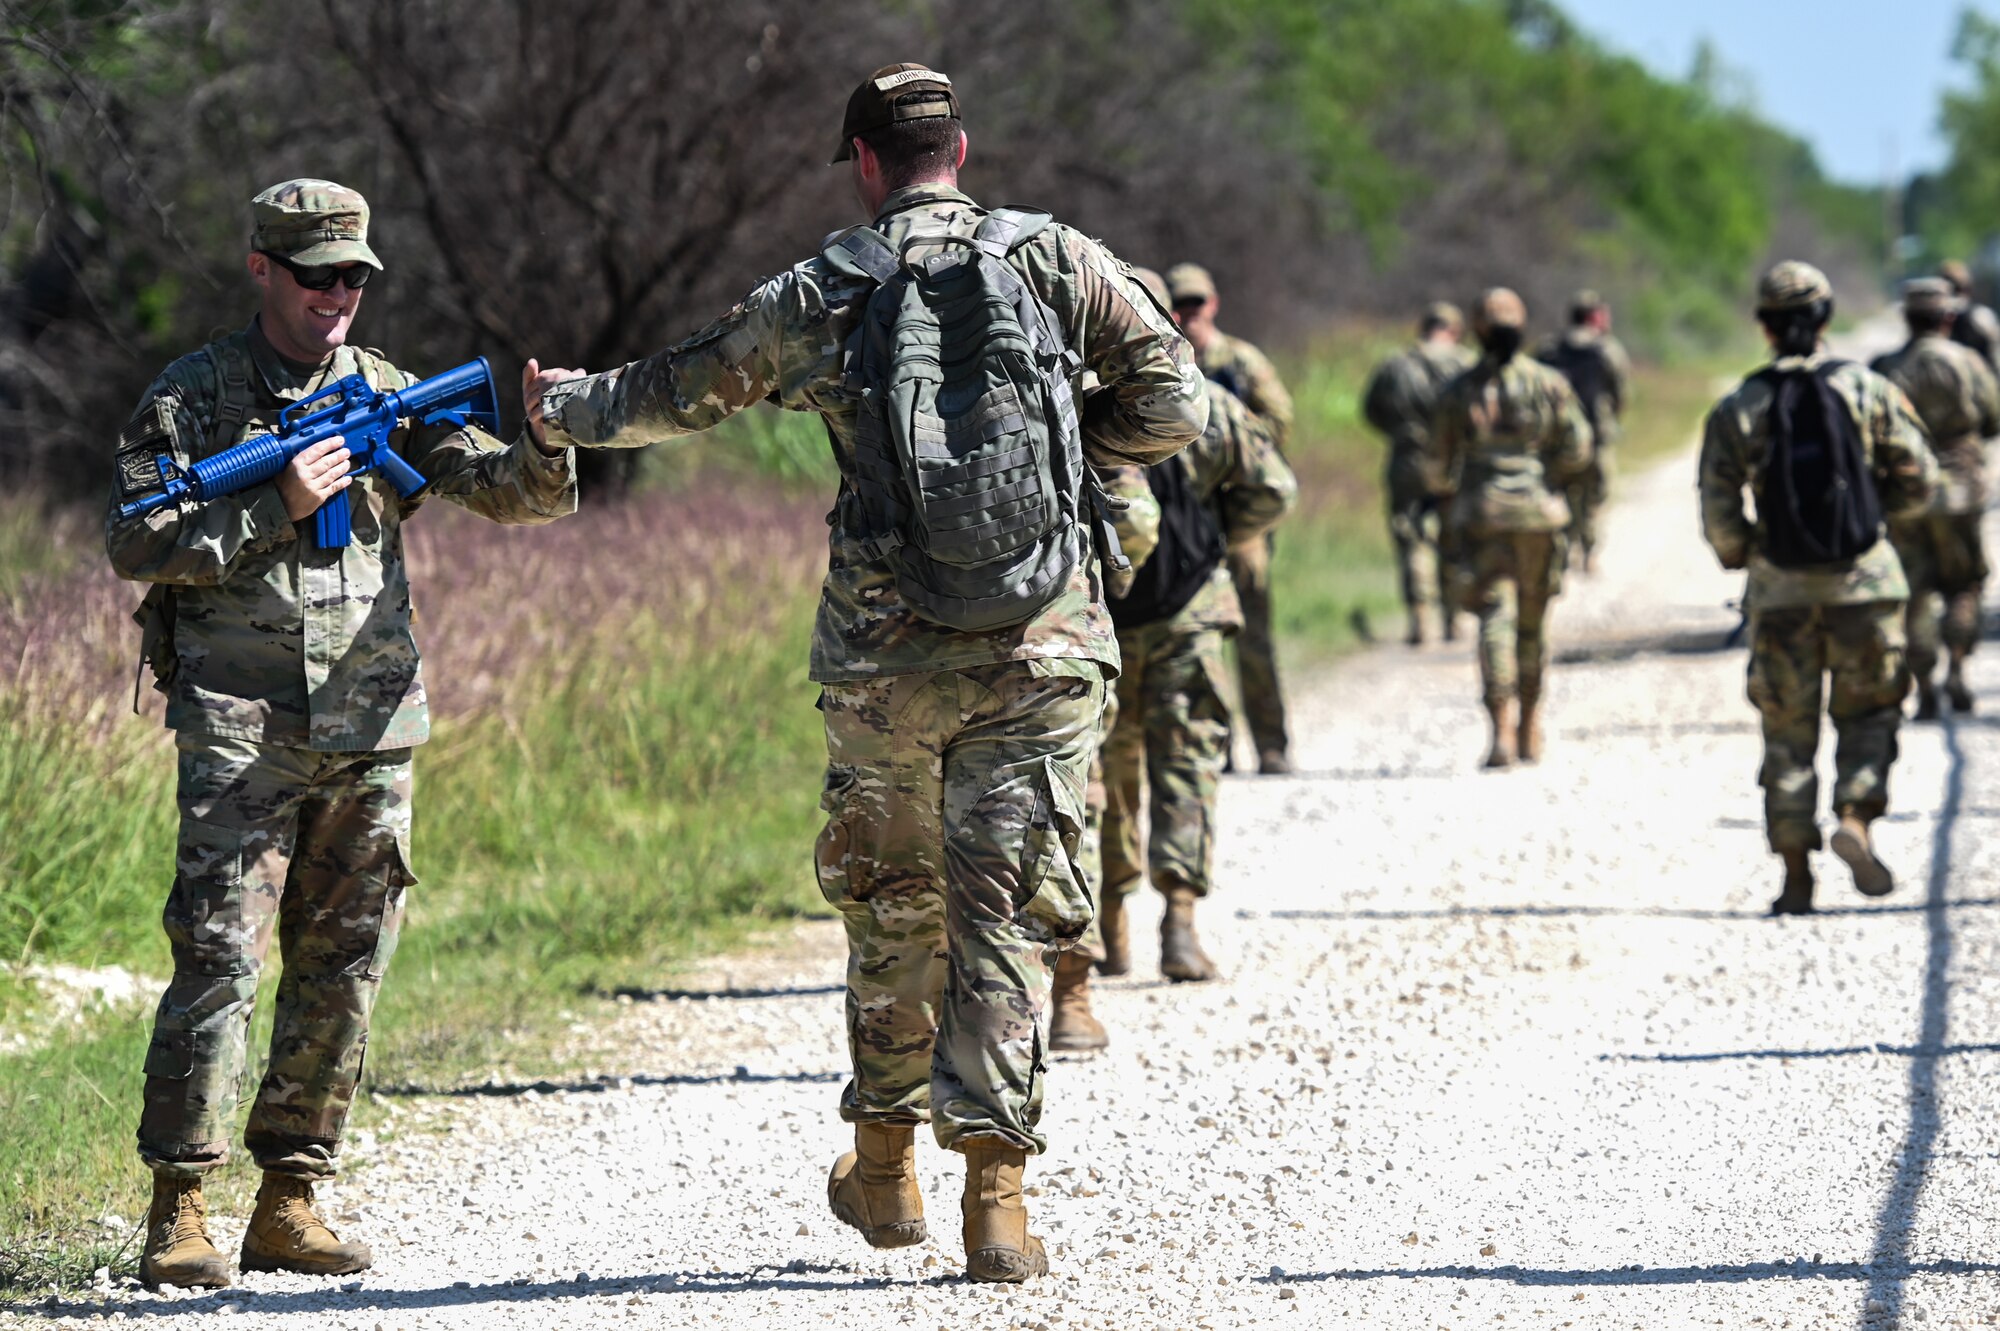 U.S. Air Force Col. Matthew Altman (left), 47th Mission Support Group commander, fist bumps Staff Sgt. Nicholas Johnson, 47th Contracting Squadron contract specialist, during a training exercise at Laughlin Air Force Base, Texas, on April 28, 2023.